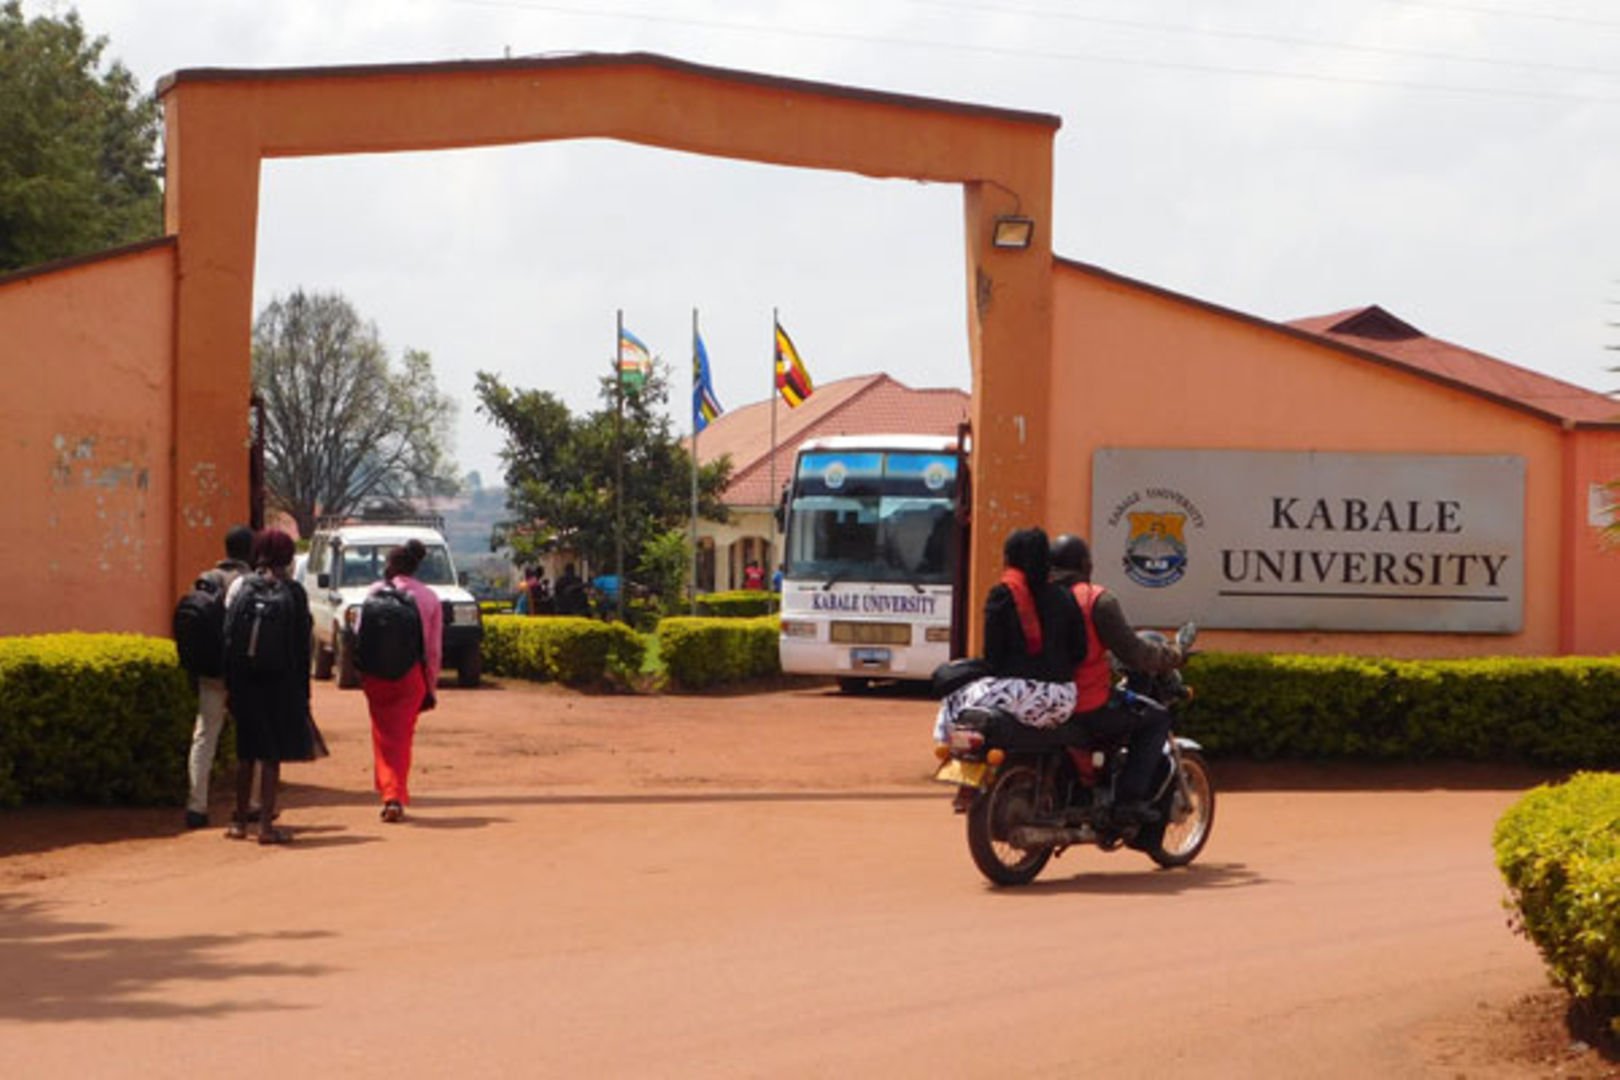 IGG petitioned over mismanagement at Kabale University